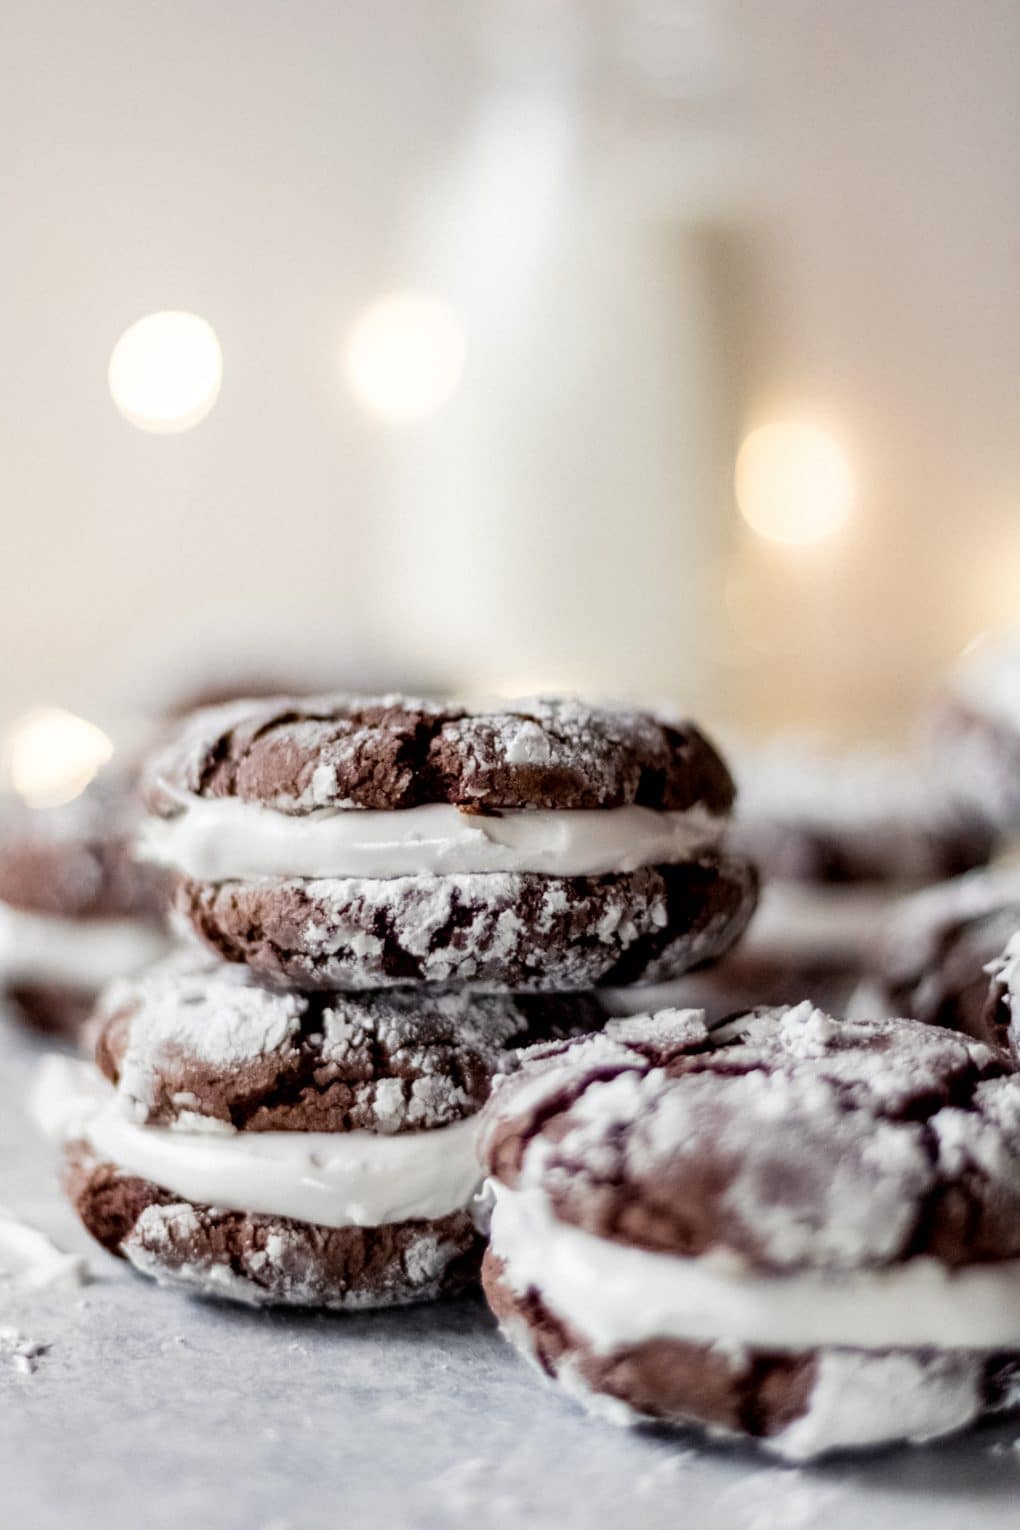 Three hot cocoa sandwich cookies stacked with additional cookies in the background. There's white christmas lights and a jug of milk in the background as well.